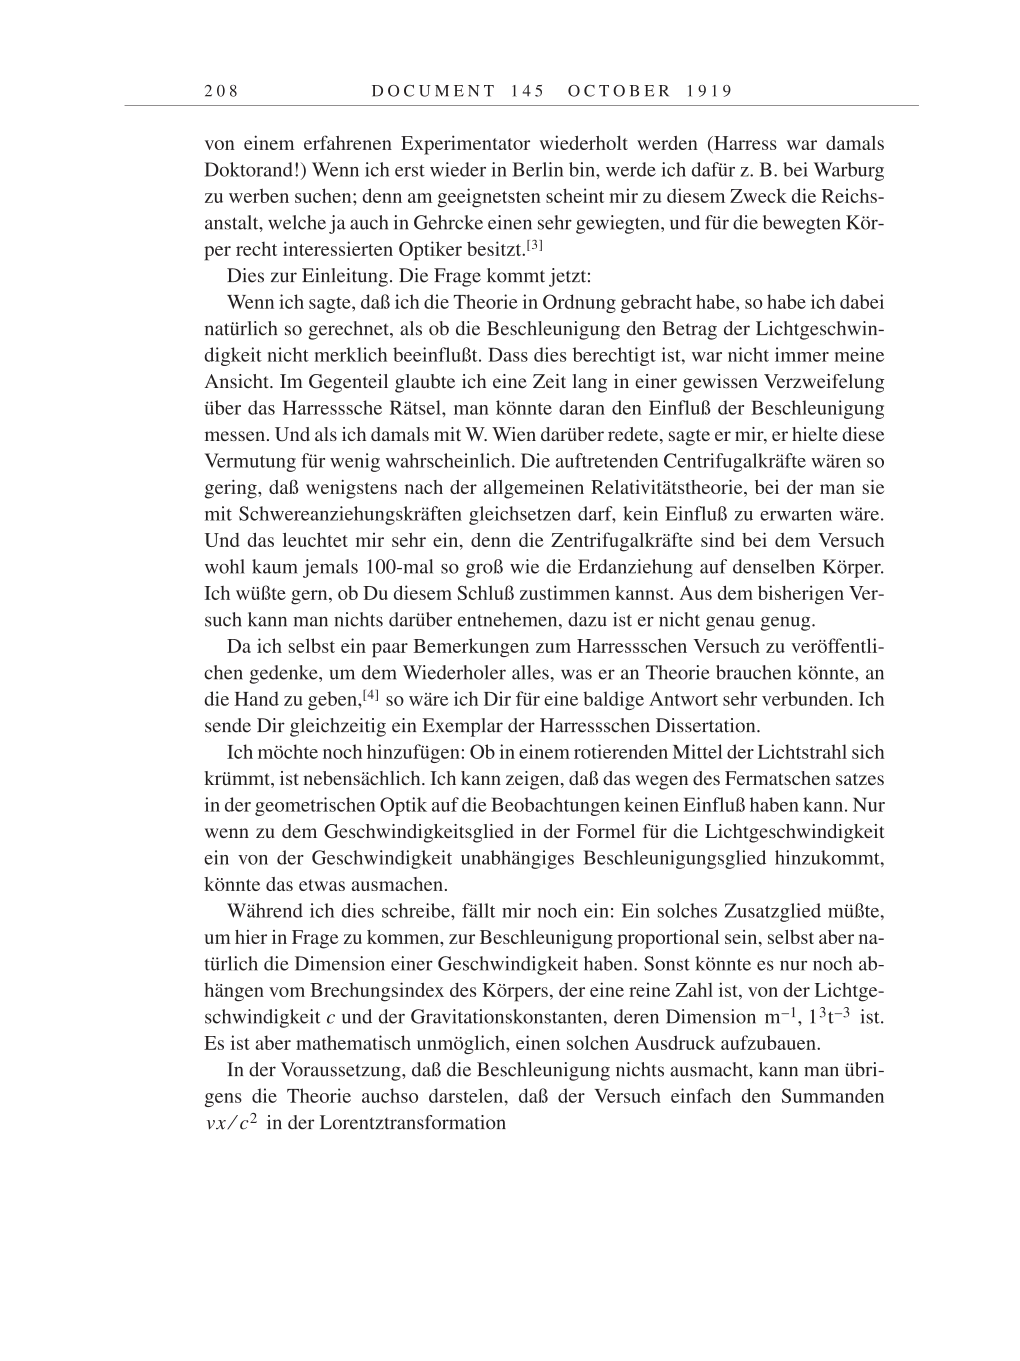 Volume 9: The Berlin Years: Correspondence January 1919-April 1920 page 208